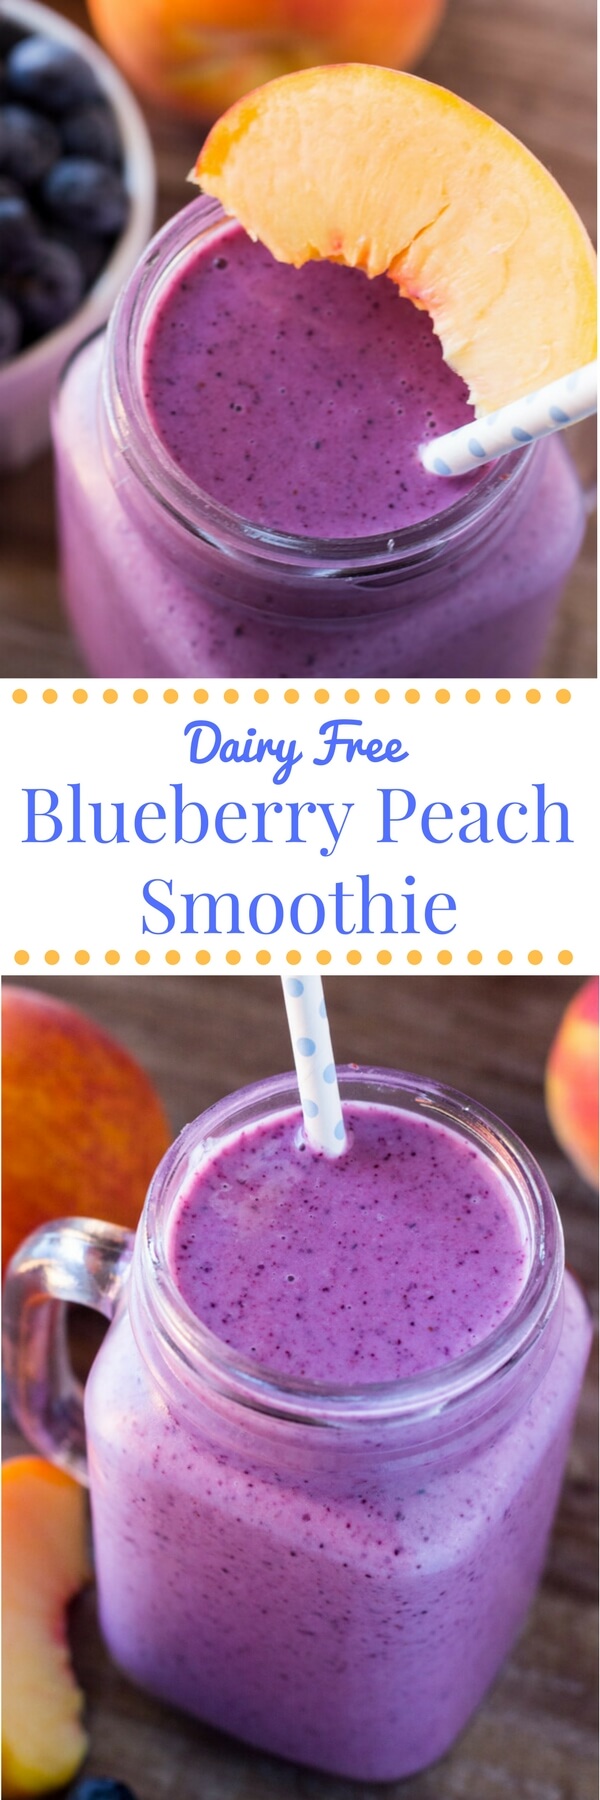 This blueberry peach smoothie with almond milk is dairy free, naturally sweetened & so delicious from the fresh summer fruit. 4 ingredients & perfectly refreshing!